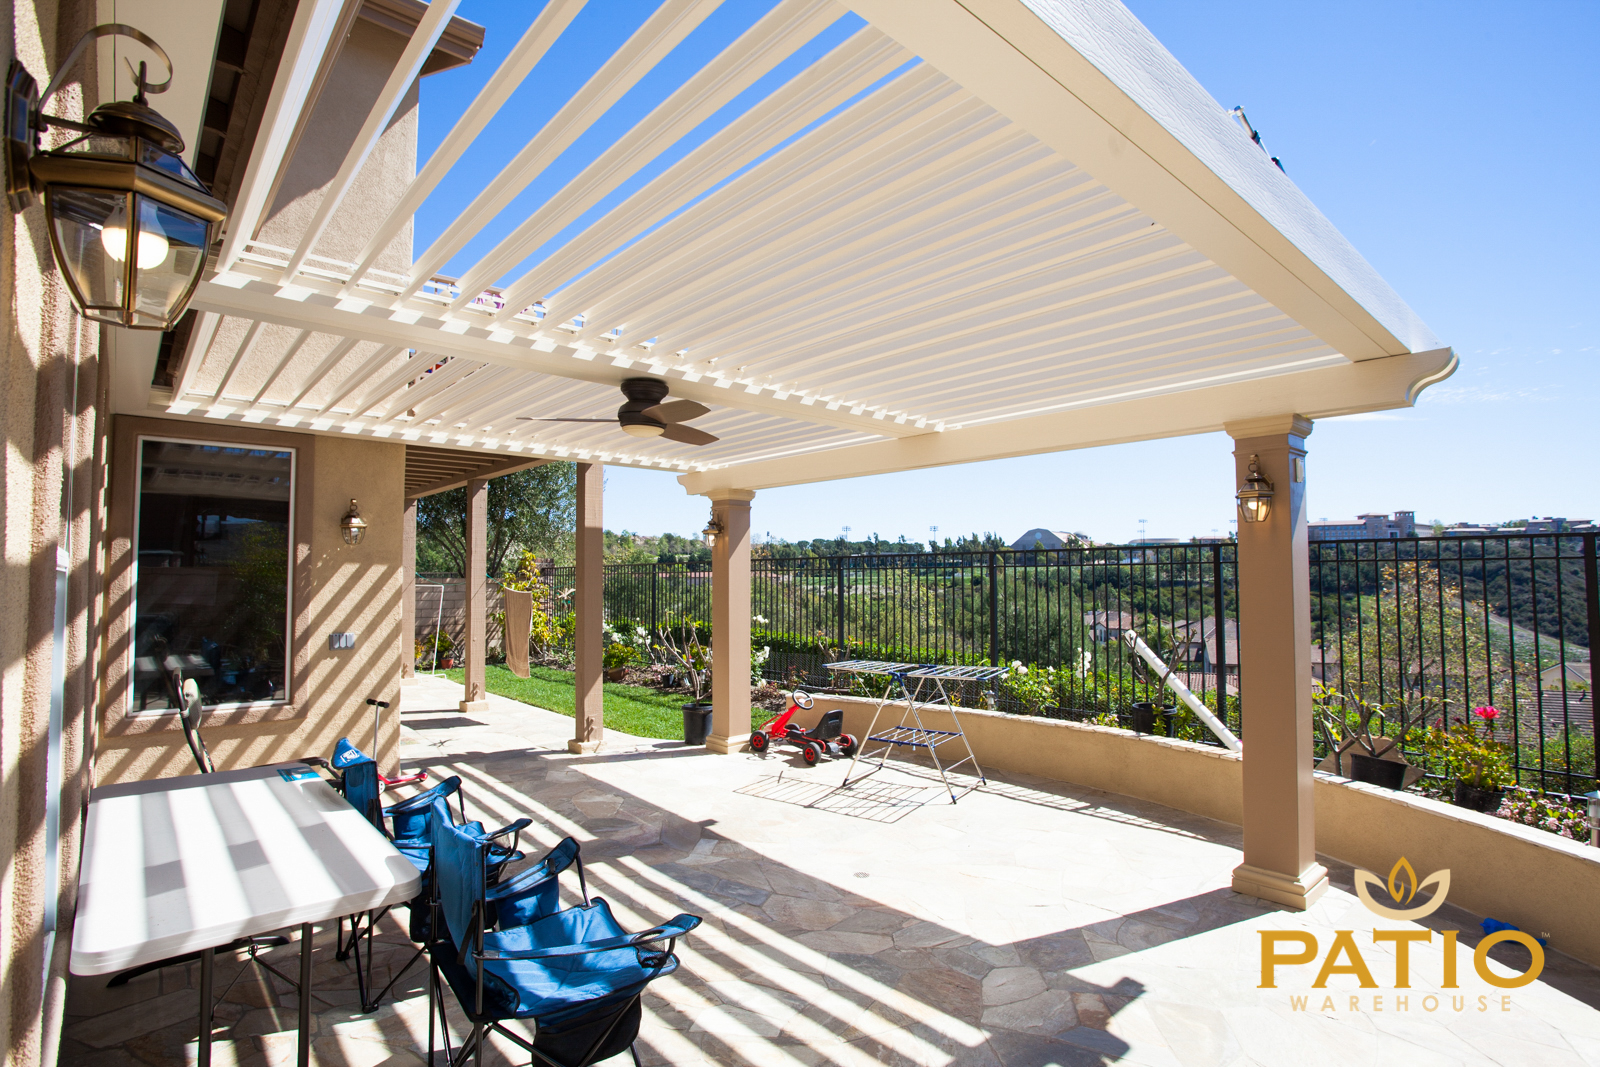 Elitewood Louvered Patio Covers